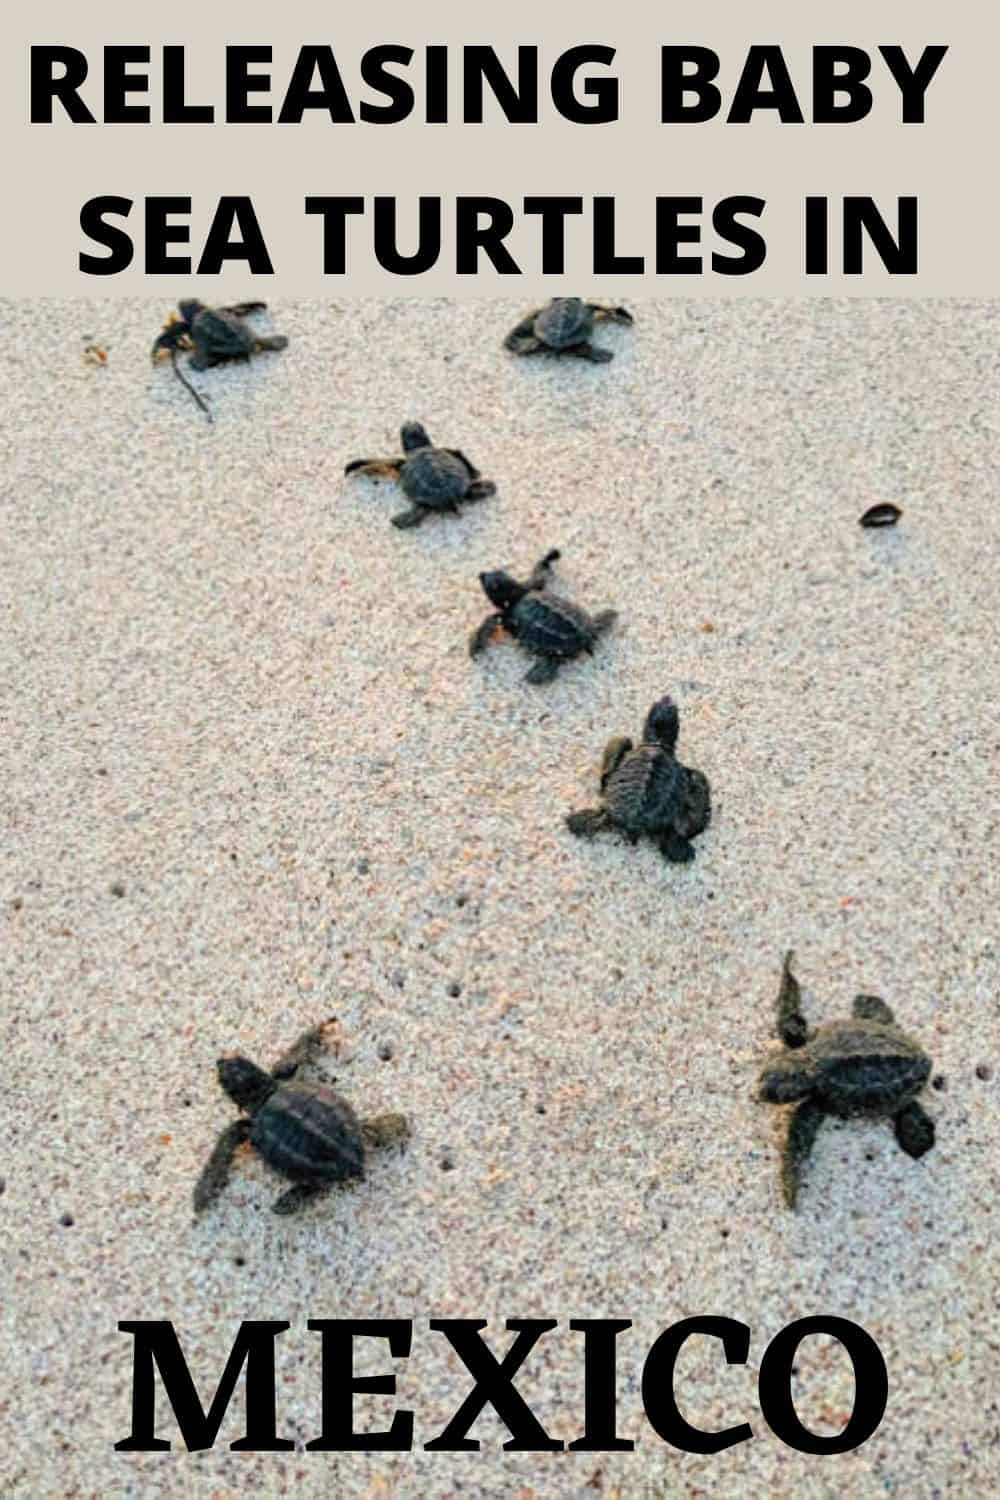 In Riviera Nayarit, Mexico you can help the turtle sanctuaries with their work of protecting and releasing endangered baby sea turtles. #babyseaturtles #mexicoturtles